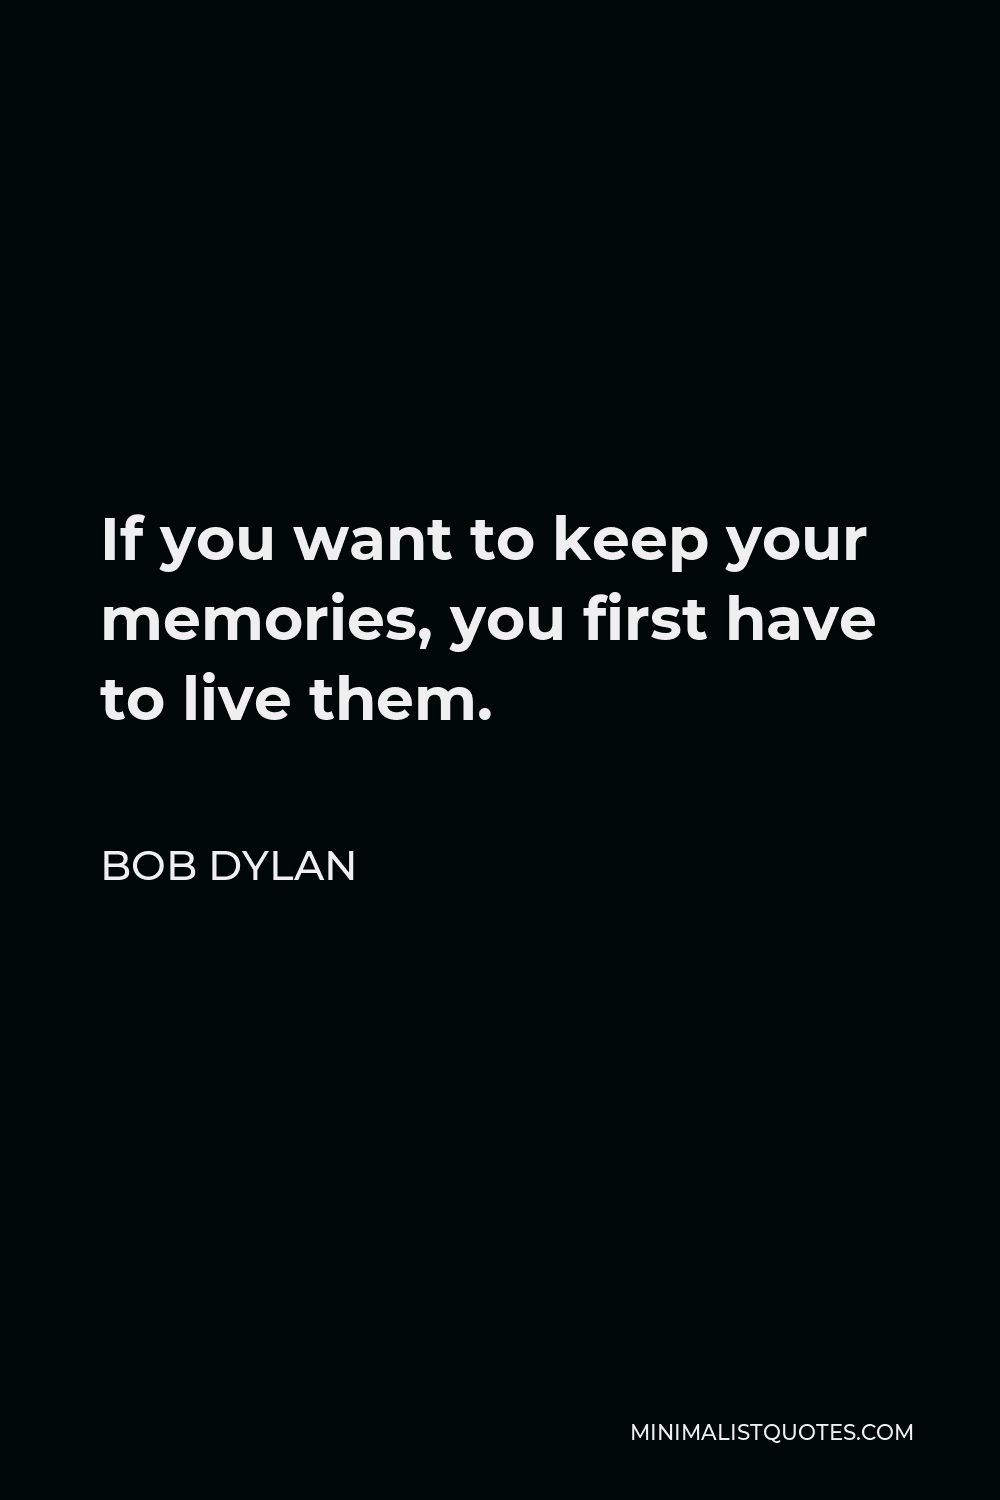 Bob Dylan Quote - If you want to keep your memories, you first have to live them.